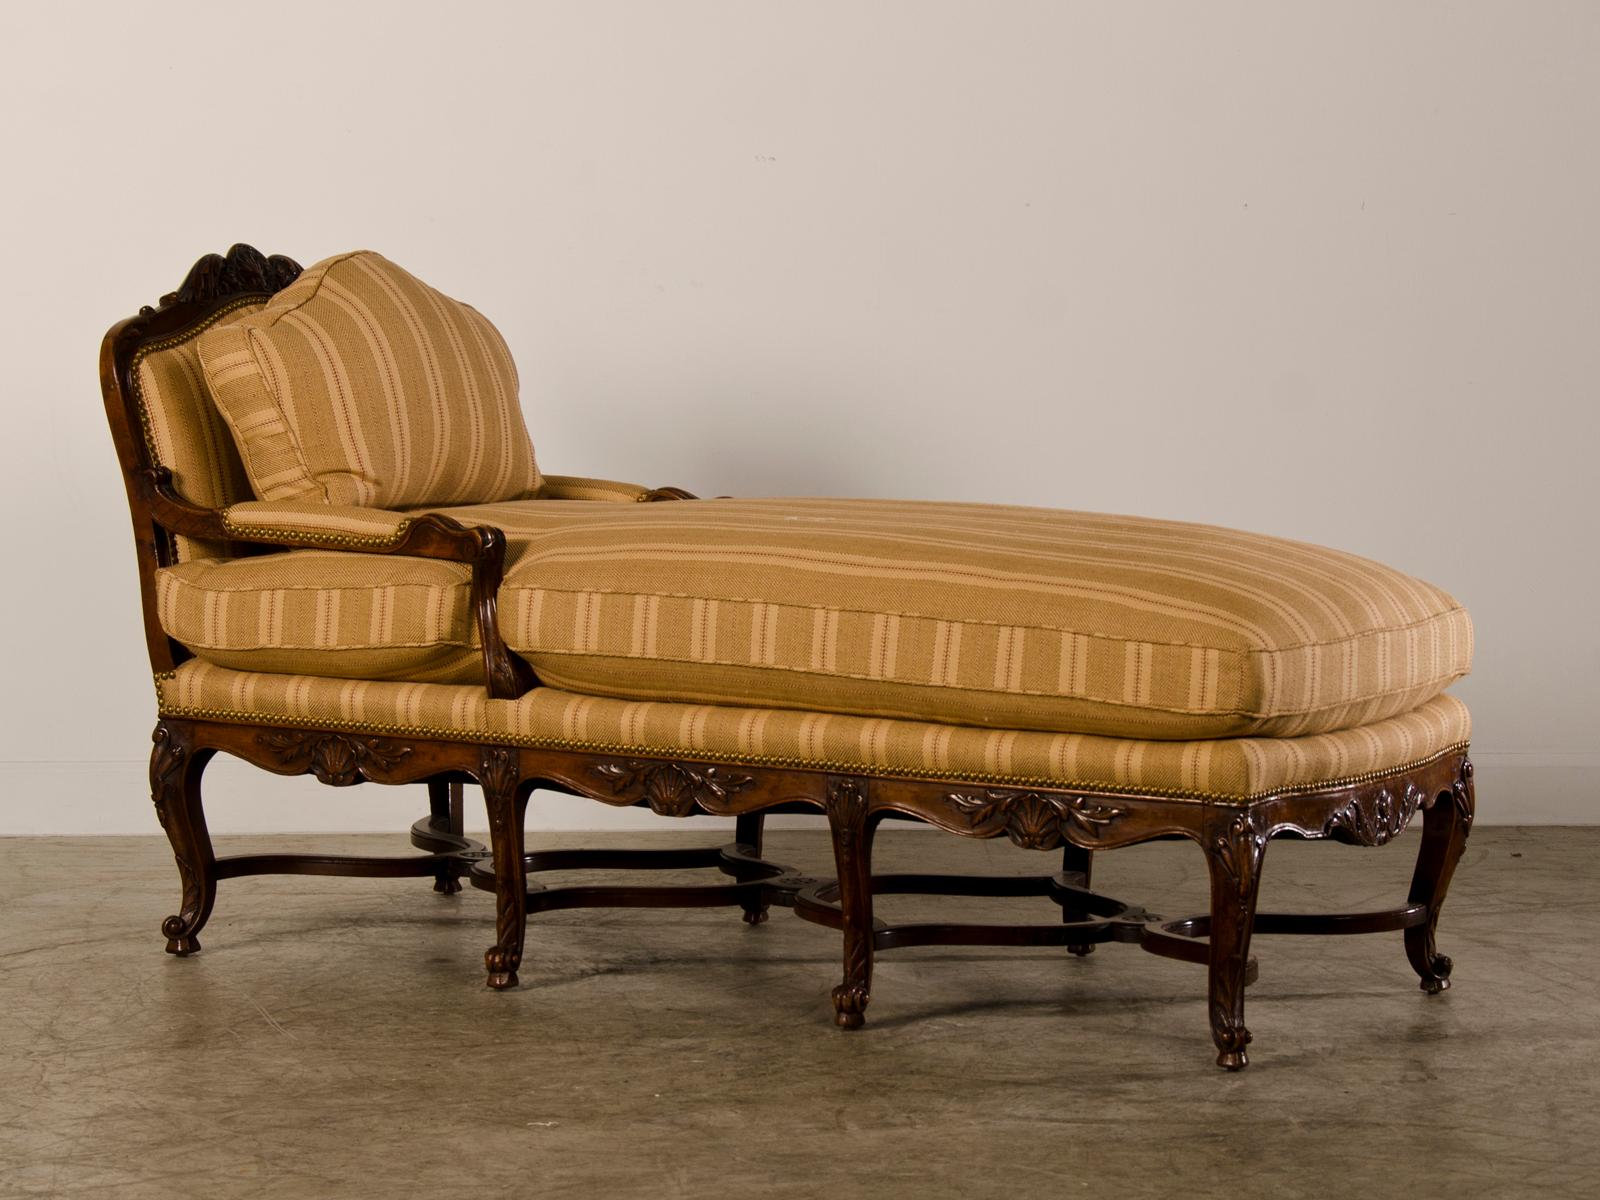 Antique French Régence Period Carved Walnut Chaise Lounge, circa 1720 For Sale 1